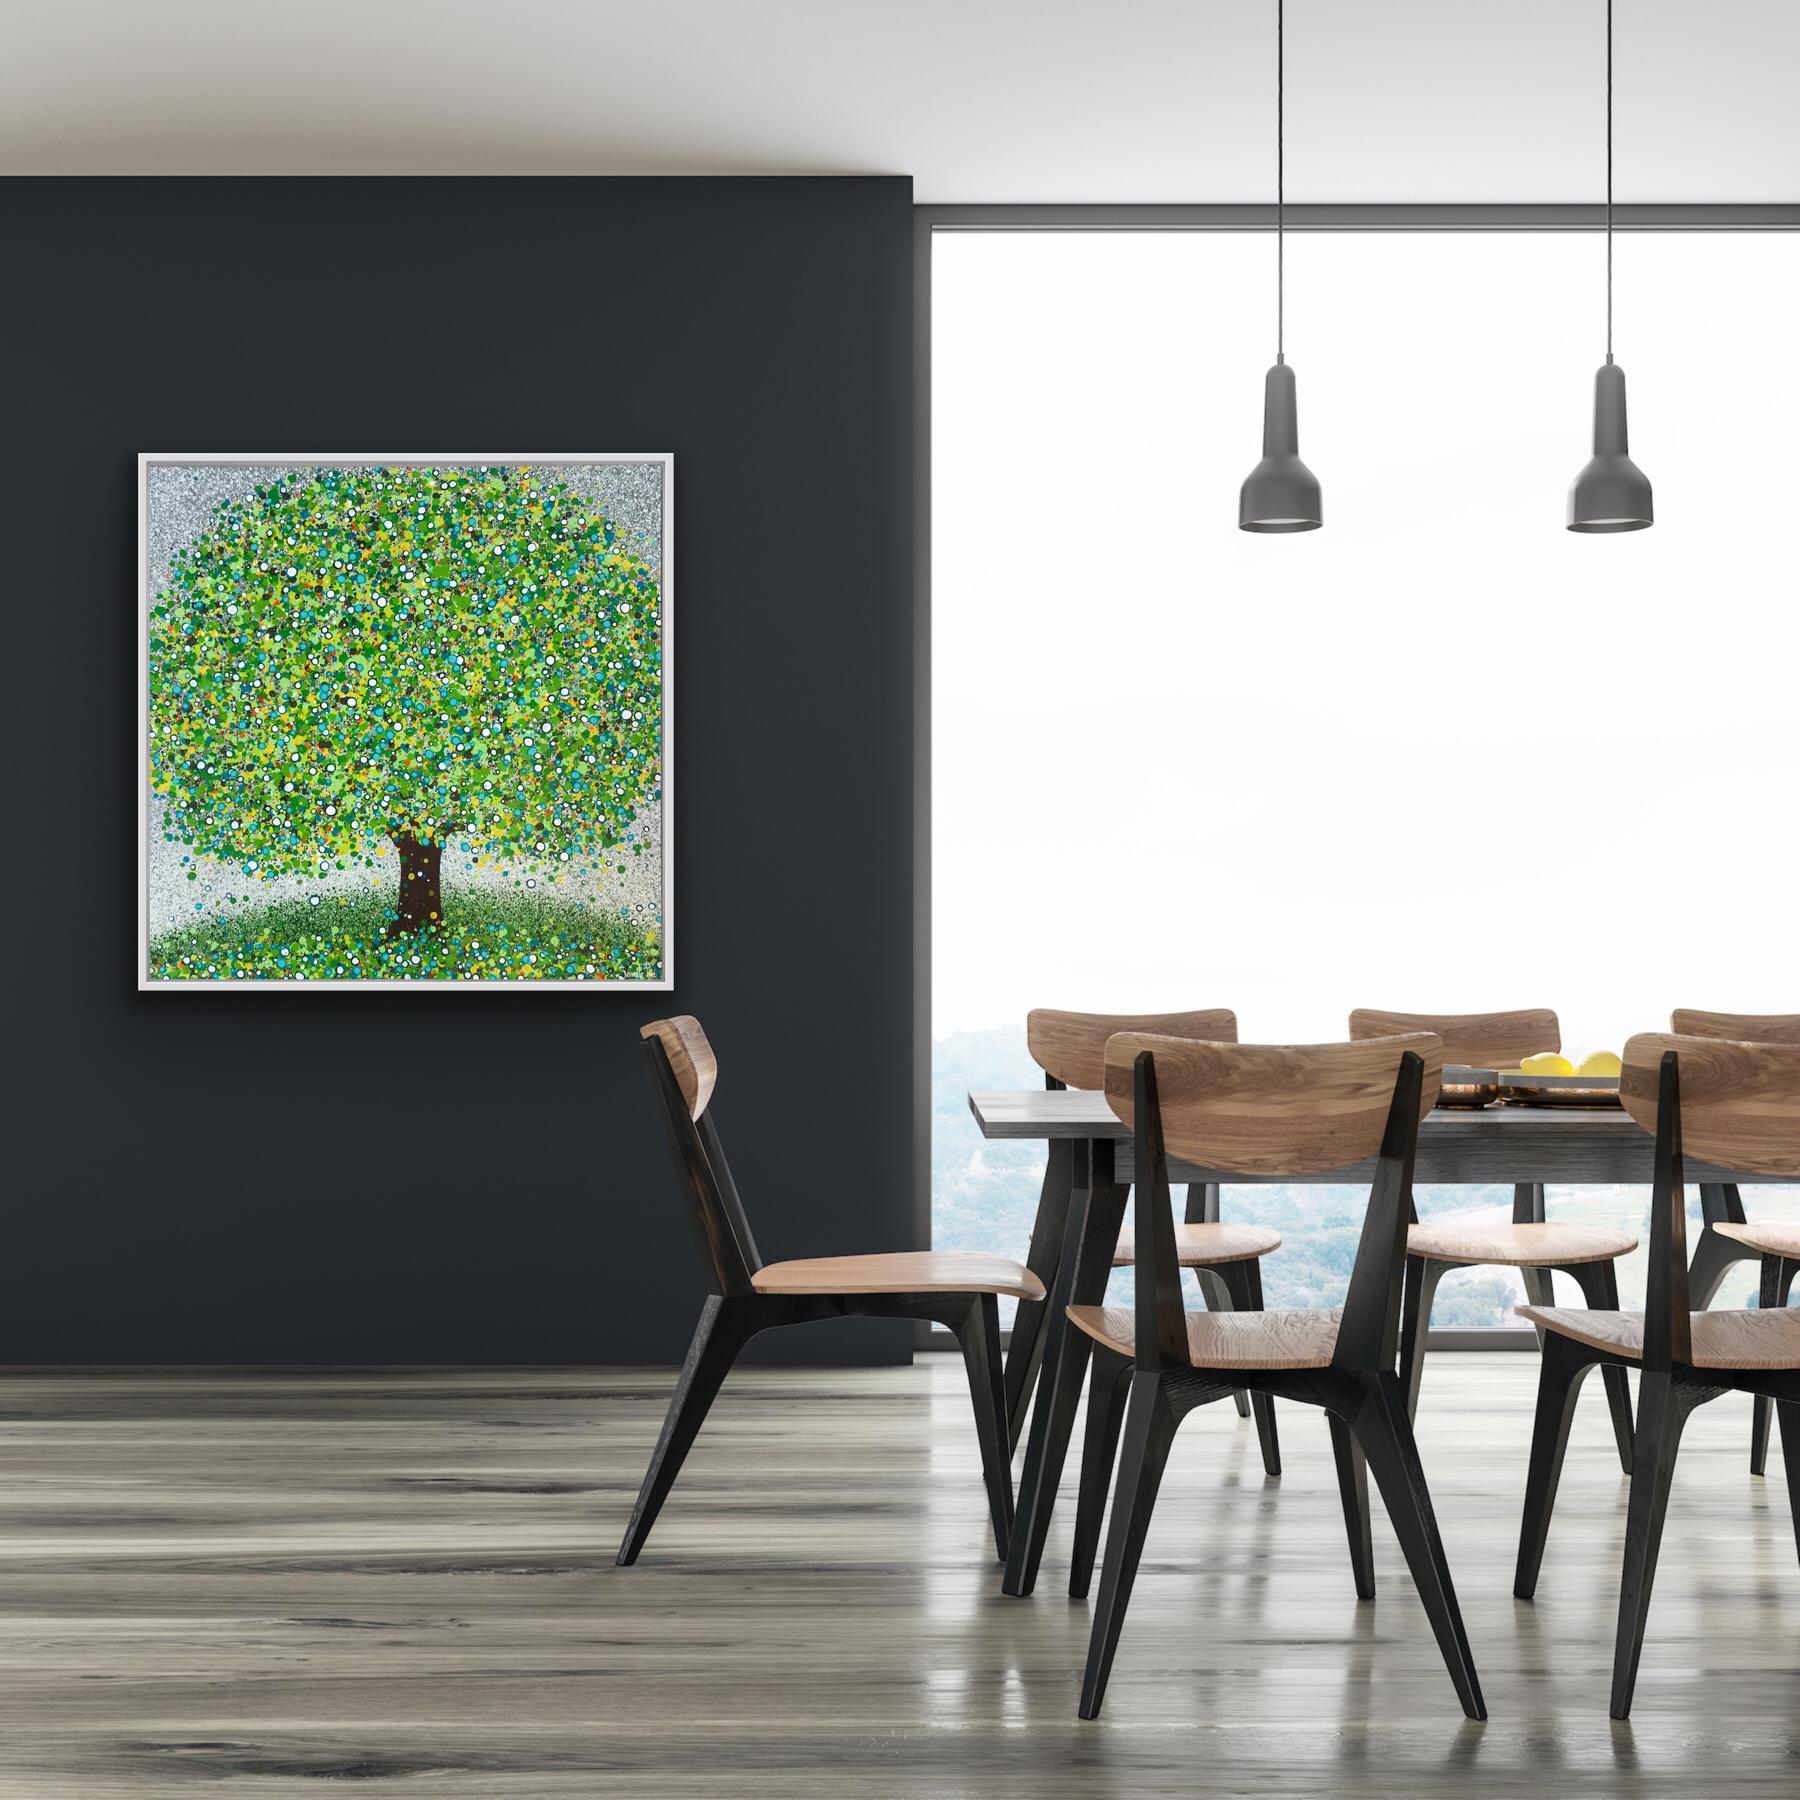 Original Painting by Sarah Pye - A single tree with a flourish of greens, blues, whites yellows and oranges.


ADDITIONAL INFORMATION:
Arbre Vert by Sarah Pye Origianal Paintinging
Acrylic paint on Canvas
Complete size of framed work: 107.5 H x